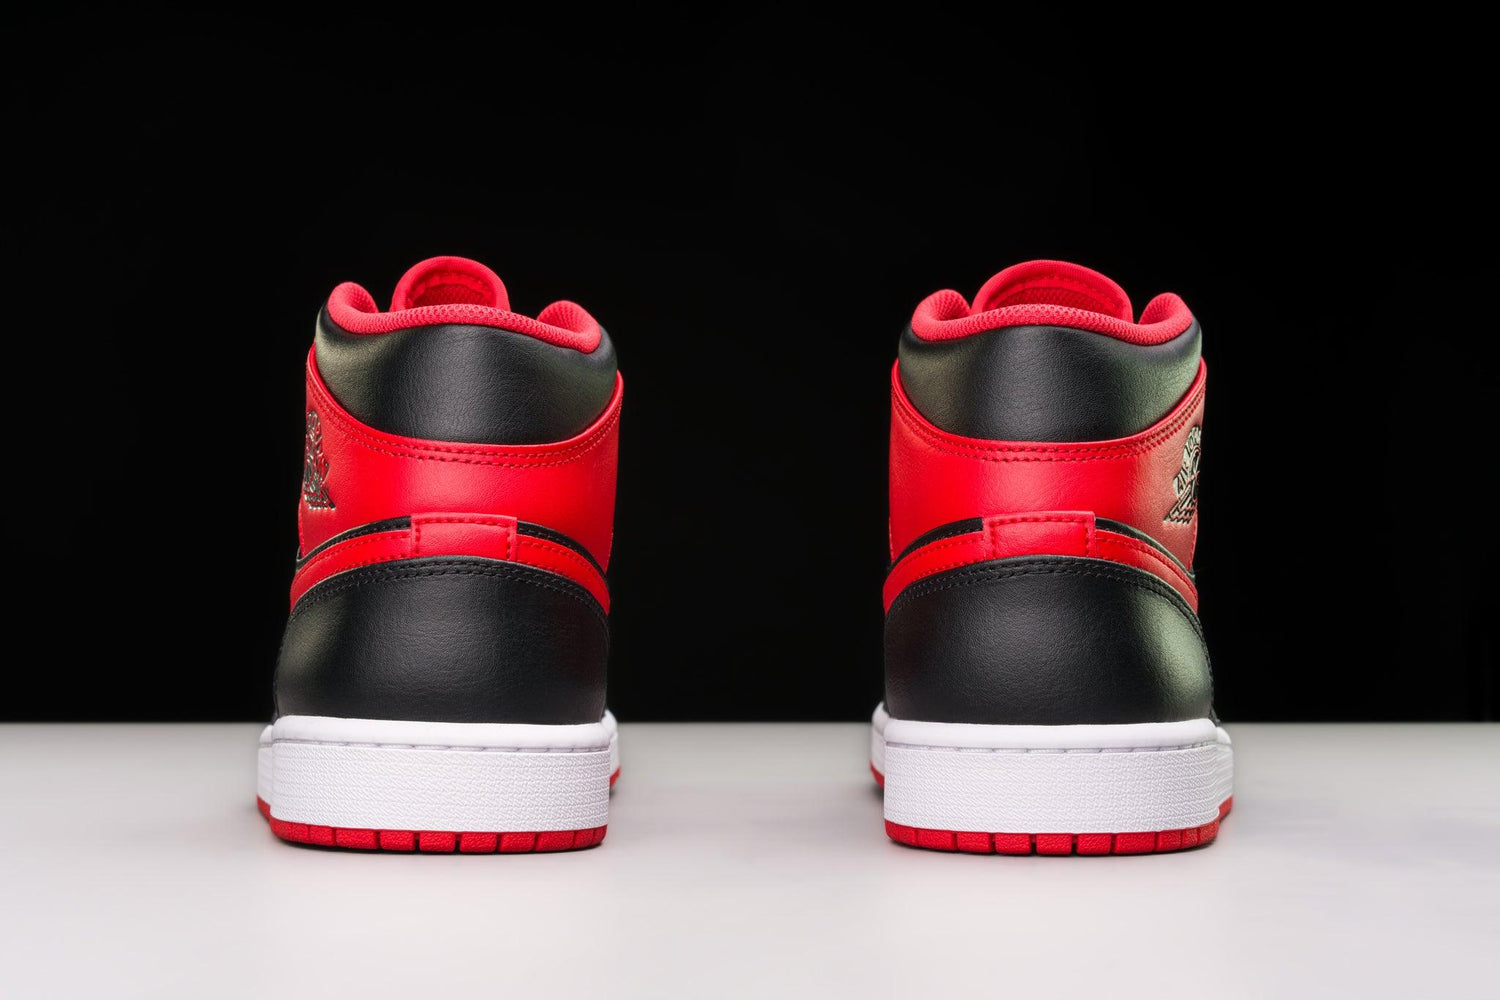 The lateral side of the jordan PAIRS Brand offre une 4 Howard University PE à Anthony Anderson Retro EXT Lite Alternate Bred (2022) - Urlfreeze Shop